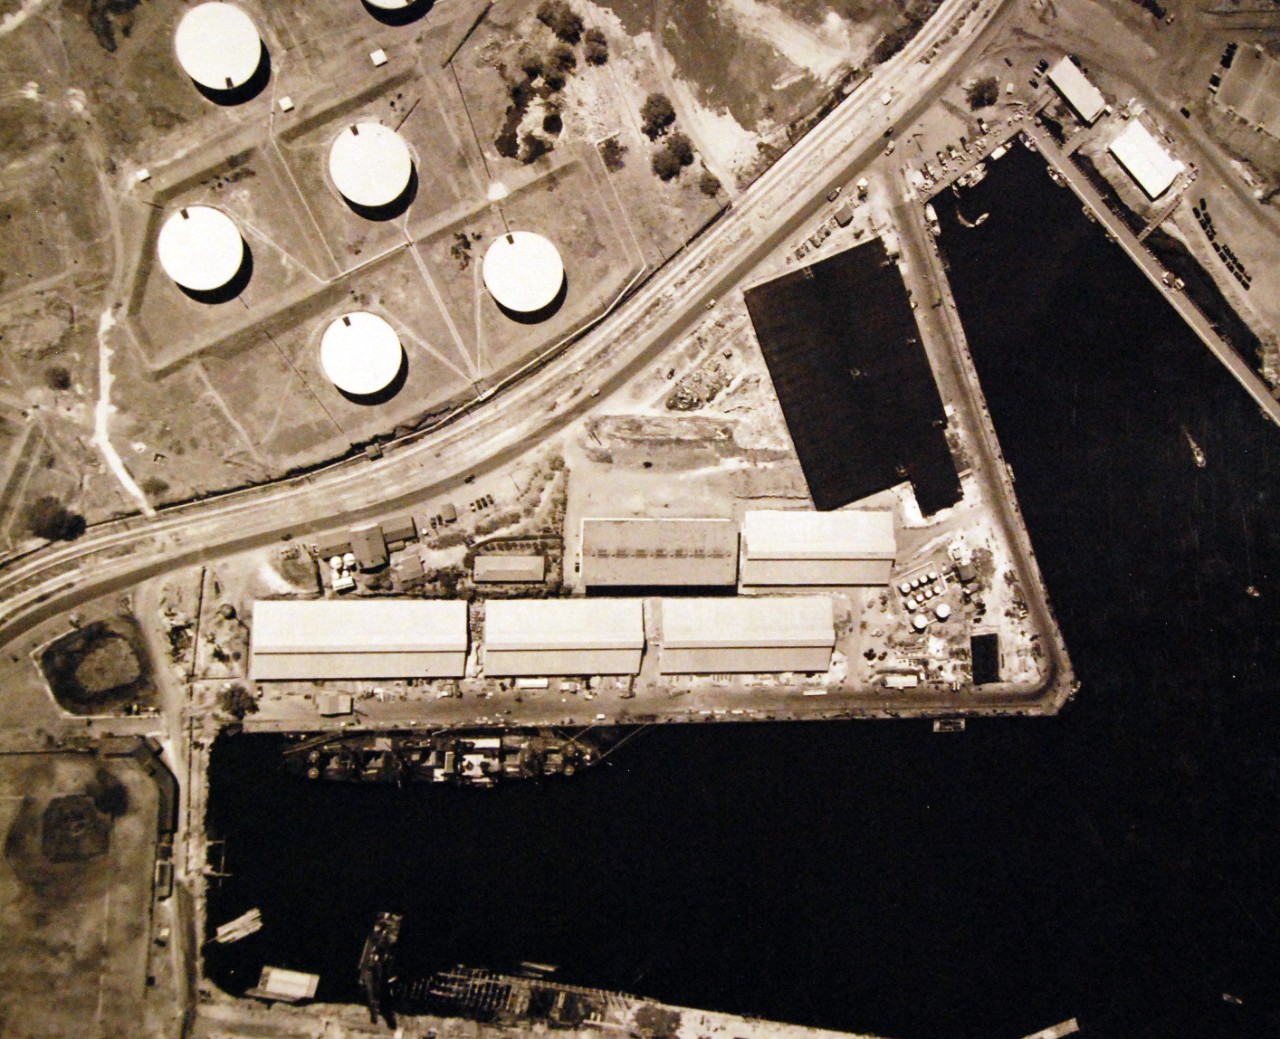 80-G-182877:   Pearl Harbor, Territory of Hawaii, October 16, 1941.   Aerial view showing the fuel depot, Merry Point, and upper tank farm, Navy Yard, Pearl Harbor, taken by aircraft from Naval Air Station, Pearl Harbor. U.S. Navy photograph, now in the collections of the National Archives (9/9/2015).